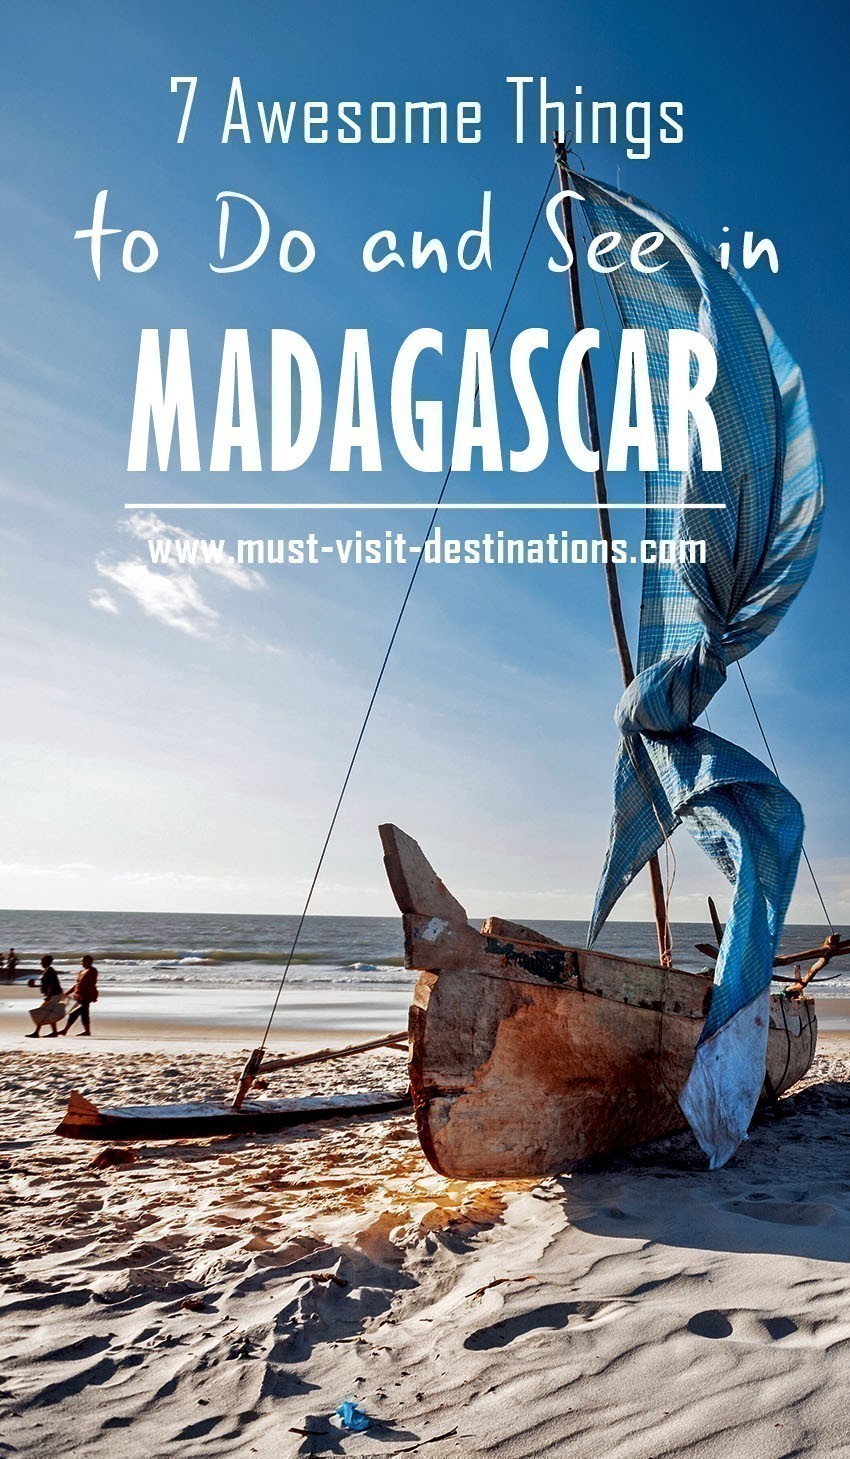 7 Awesome Things to Do and See if You Travel to Madagascar #madagascar #travel